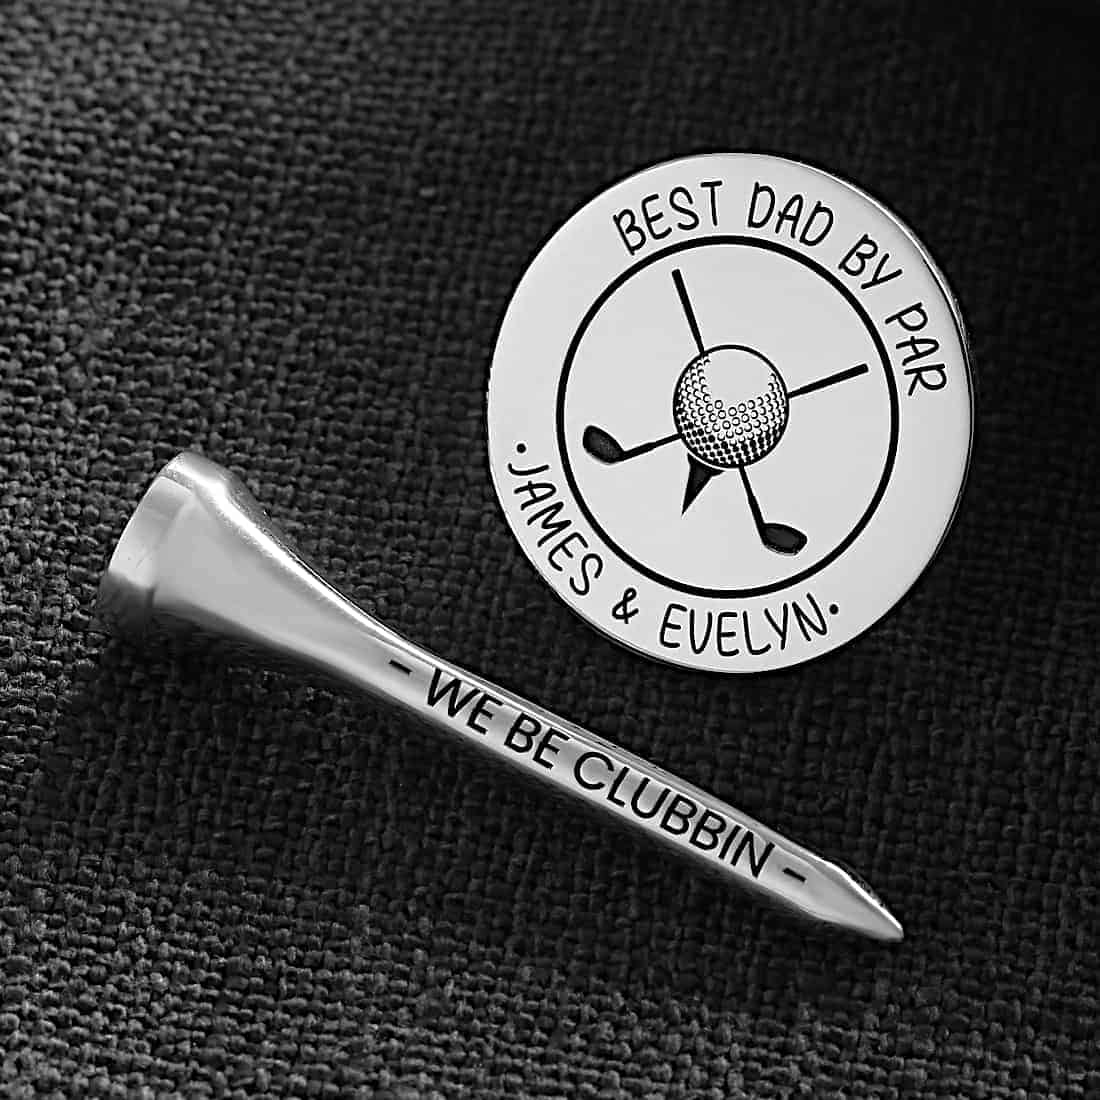 Sterling Silver Golf Ball Marker and Tee Set Best Dad by Parr Clubbin Close